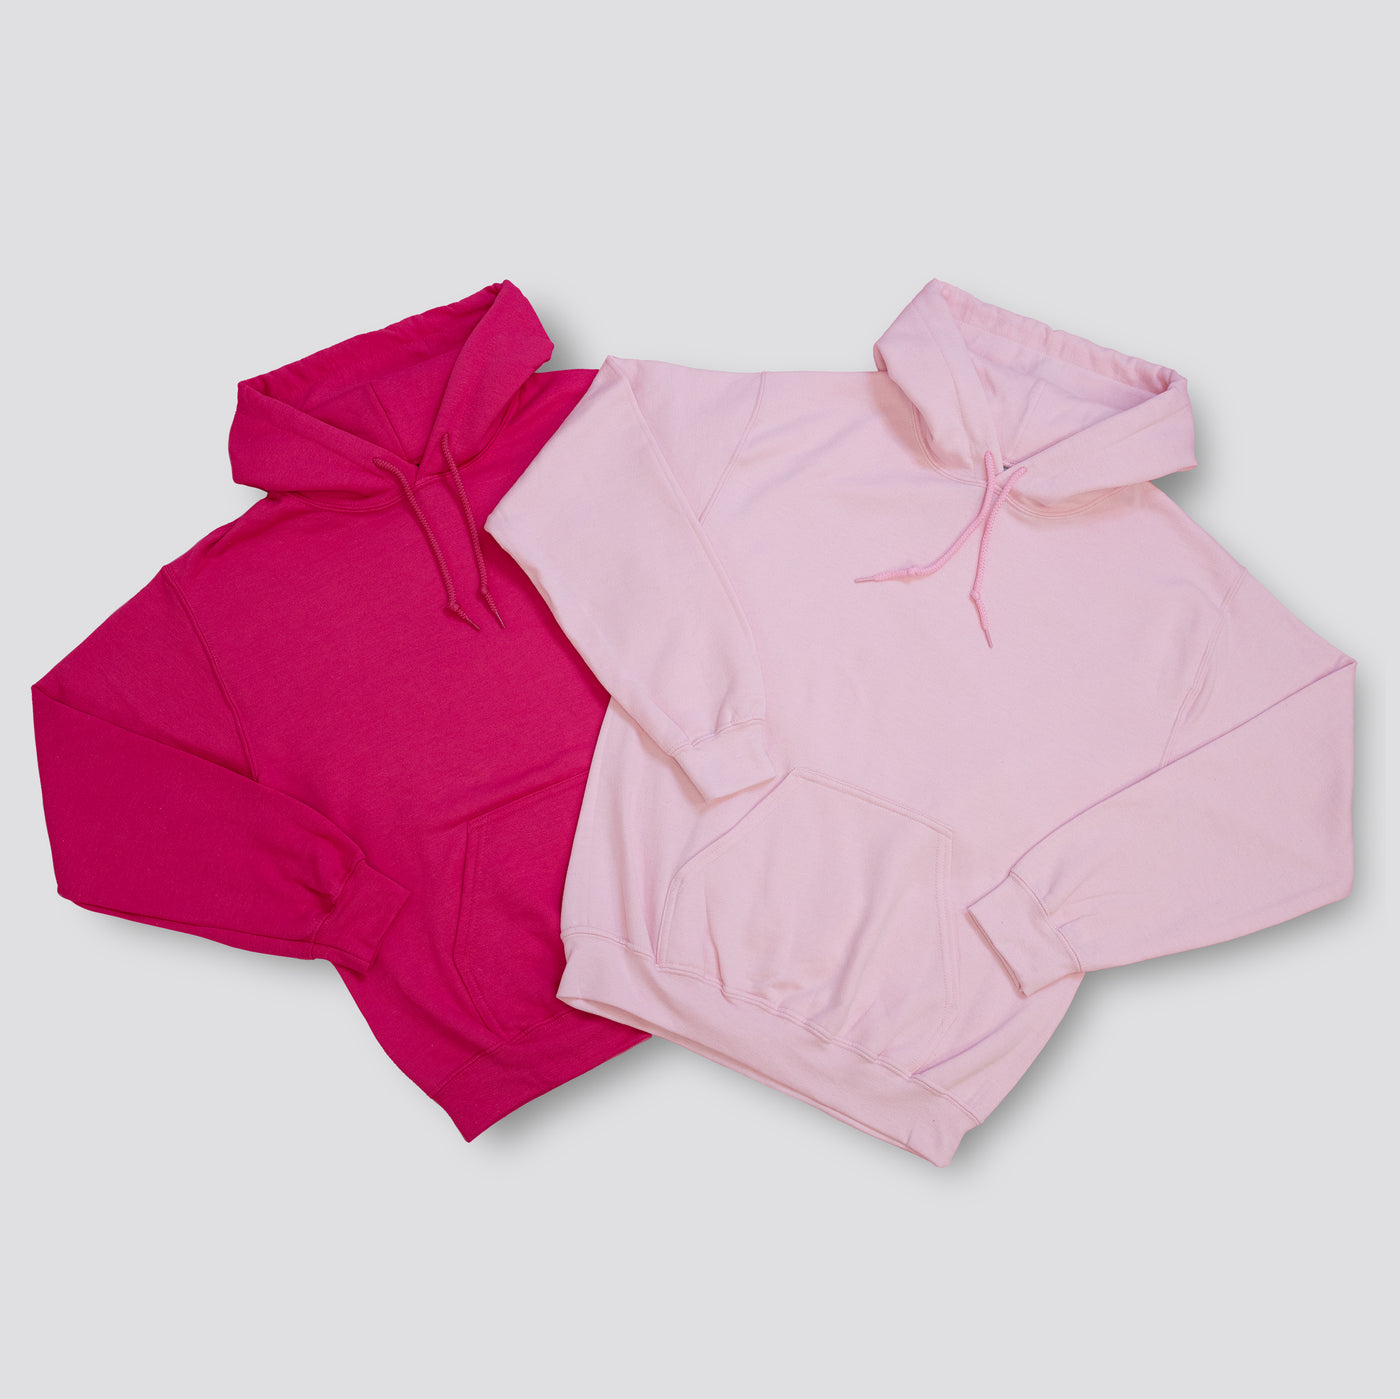 Hoodie options in pink and baby pink